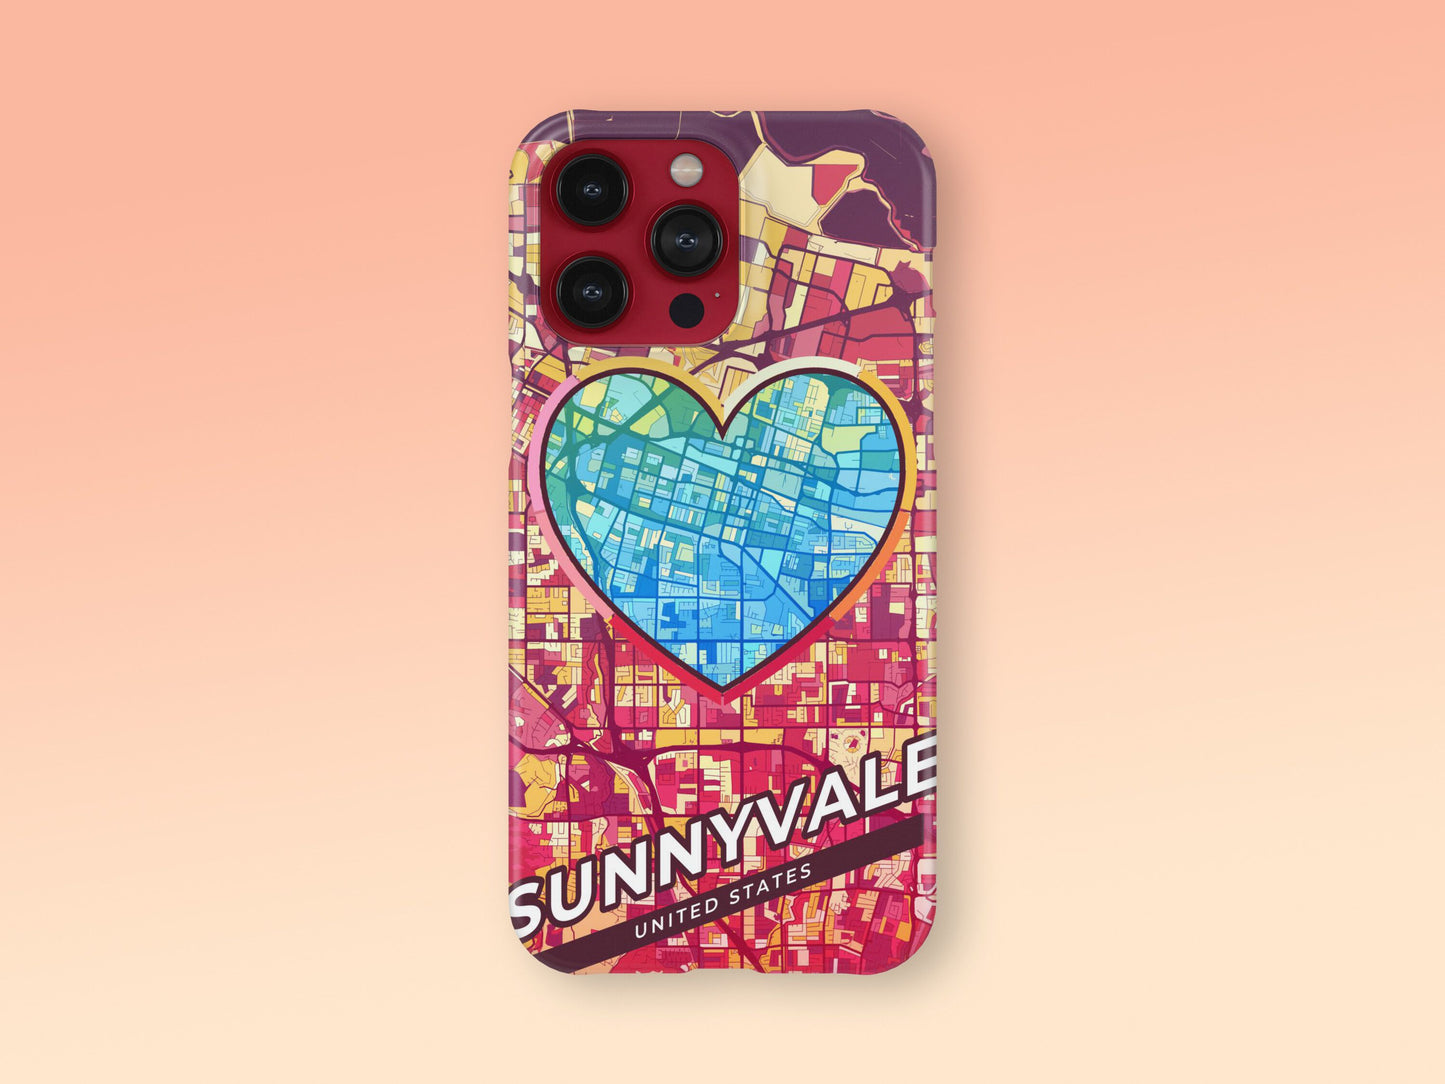 Sunnyvale California slim phone case with colorful icon 2